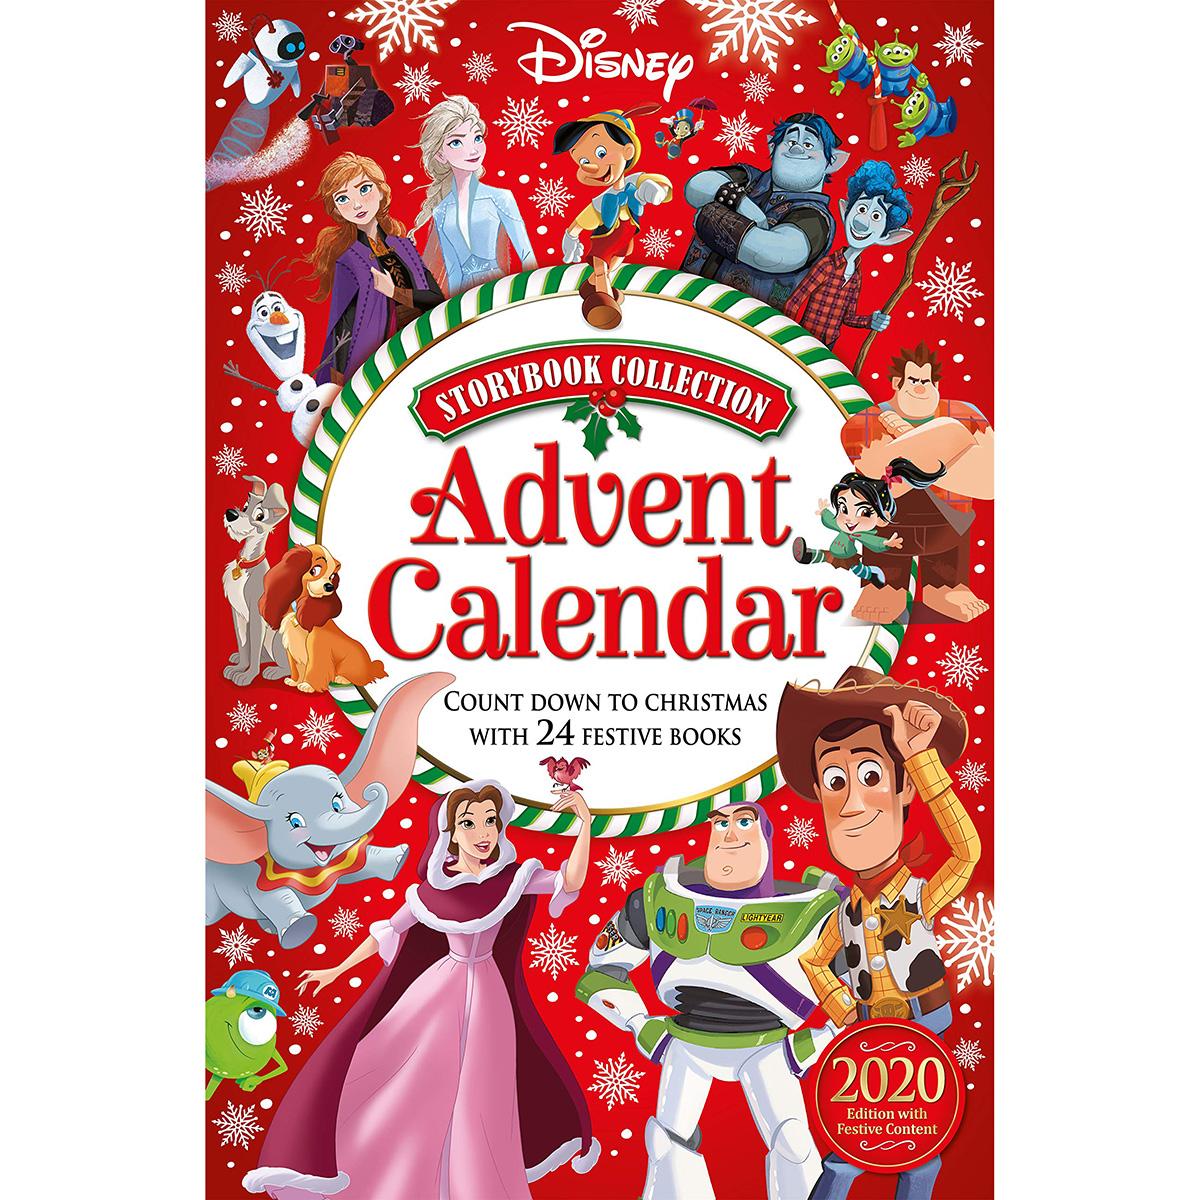 Disney Storybook Collection Advent Calendar for $19.99